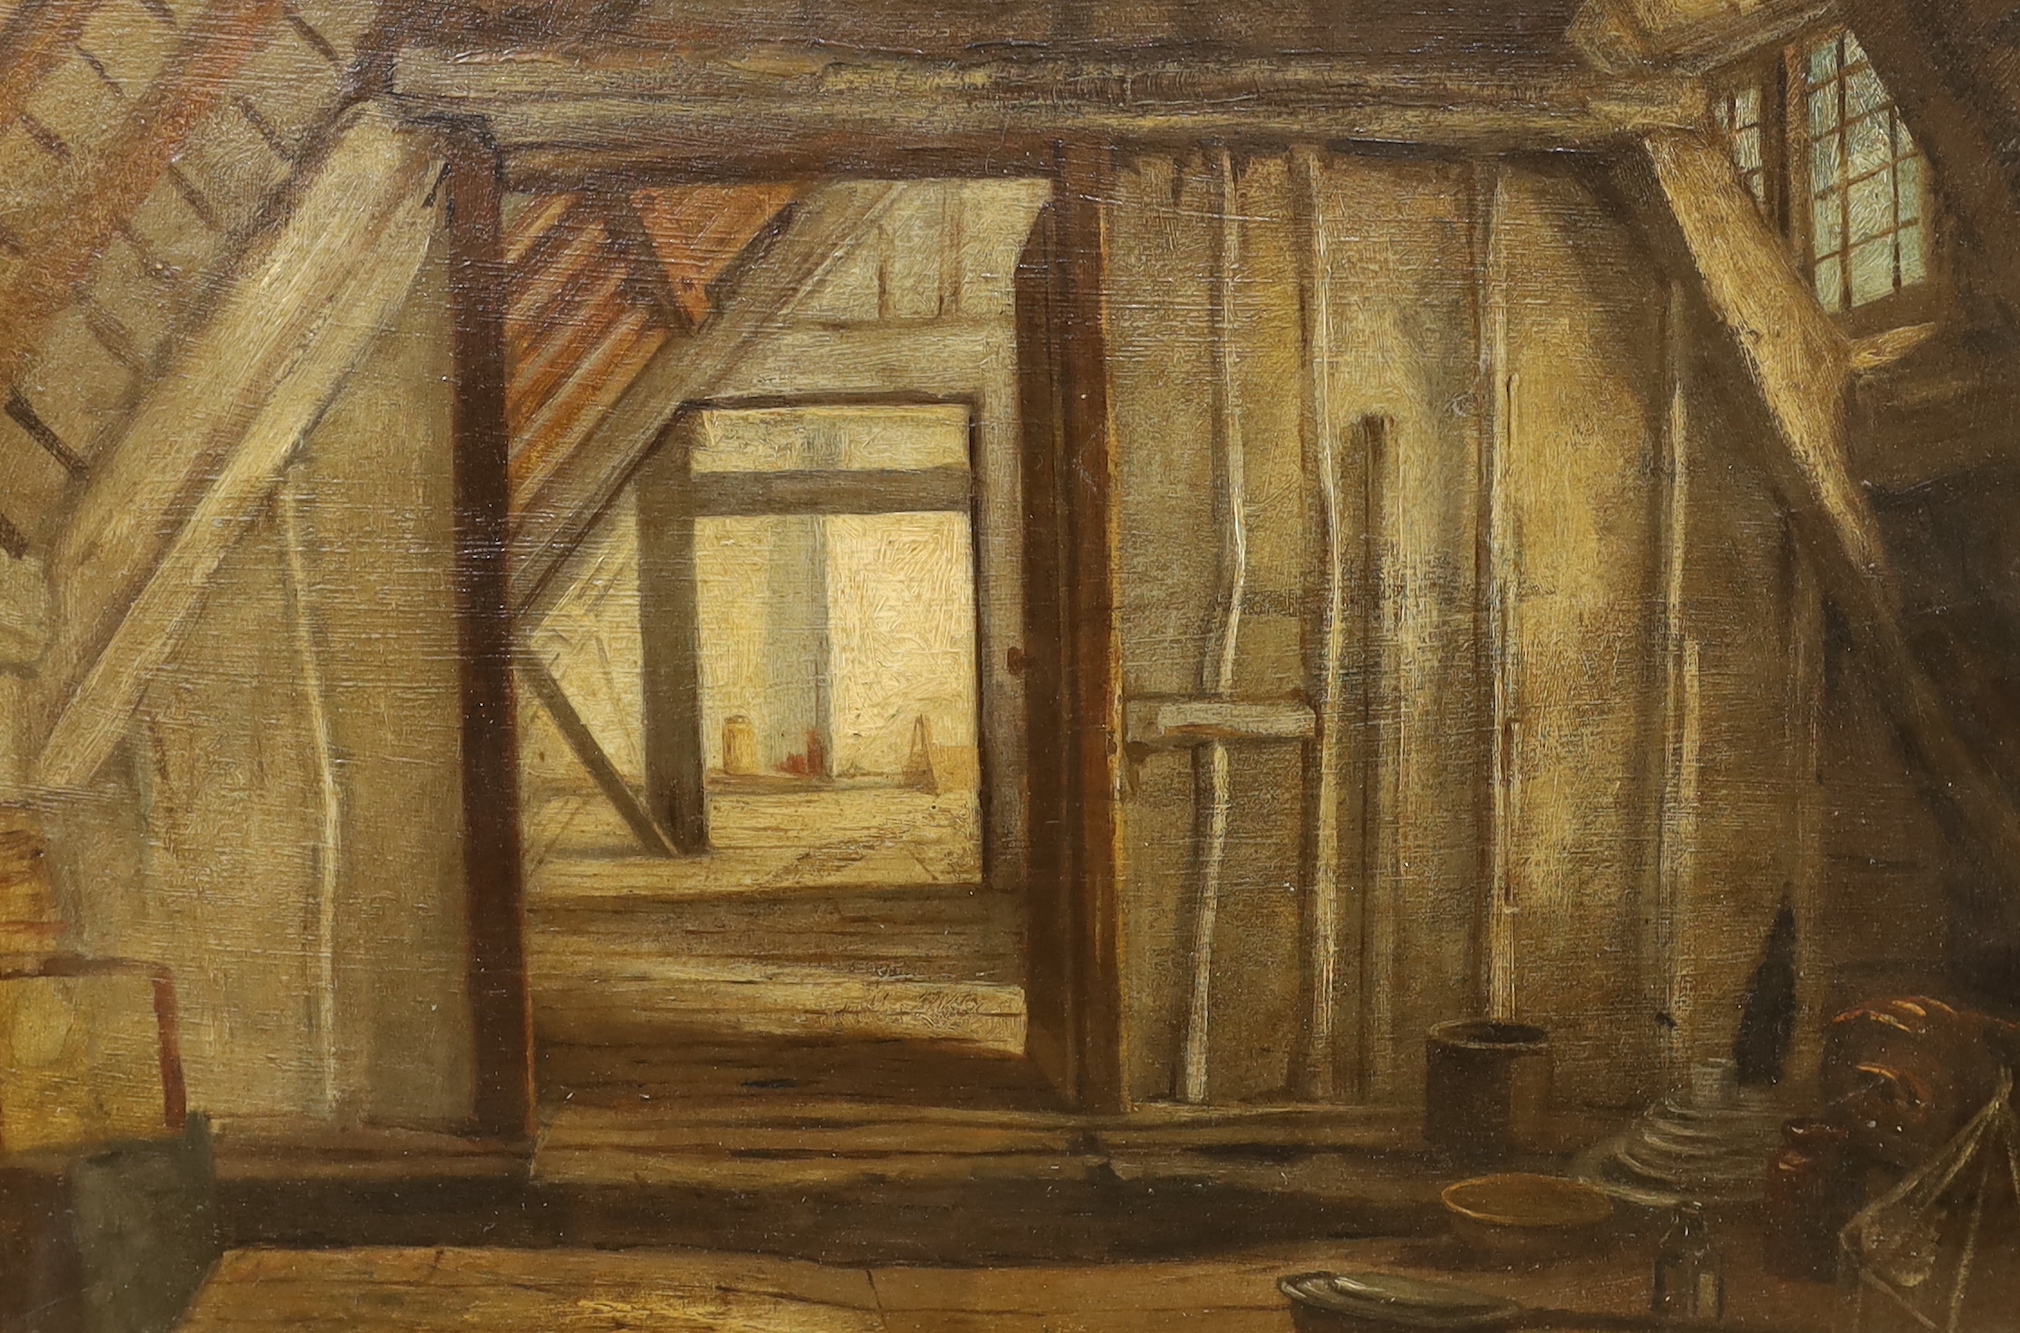 Elizabeth Hunter, two 19th century oil on boards, 'The Attics of the Corner House' and 'Room in the Old Burford Cottage Hospital', each inscribed verso, largest 44 x 31cm